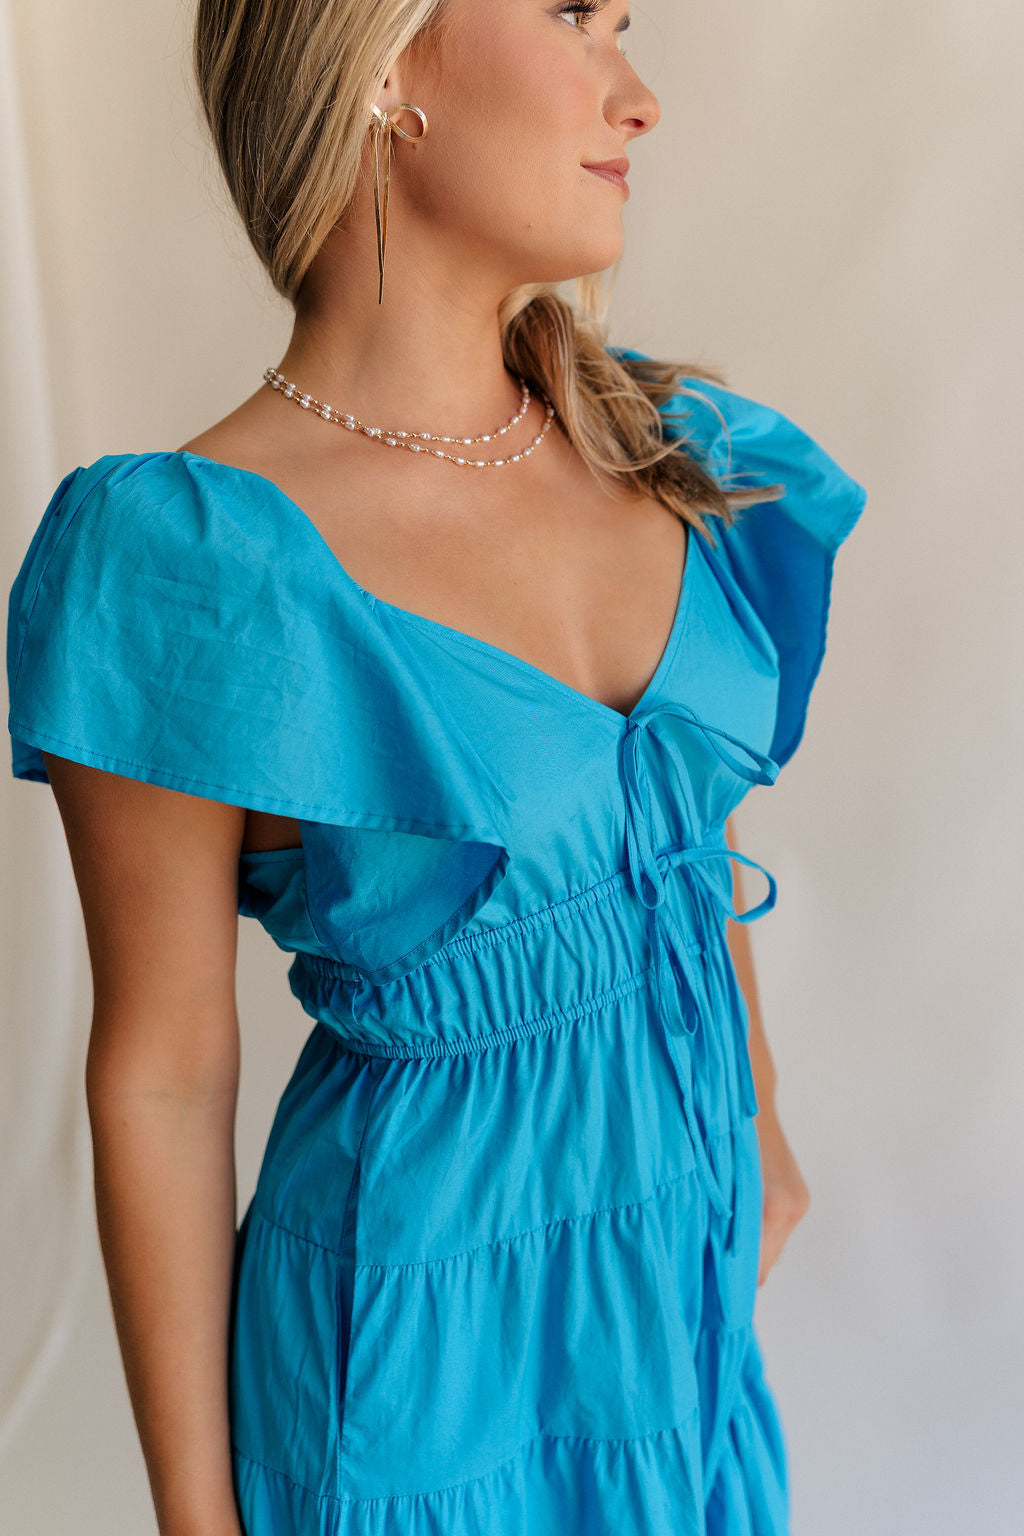 Close up side view of female model wearing the Gianna Ruffle Short Sleeve Tiered Maxi Dress in Blue which features Lightweight Fabric, Tiered Body, Midi Length, Pockets on each side, V-Neckline with a Tie Detail and Ruffle Short Sleeves. the dress is available in pink, aqua blue and white.